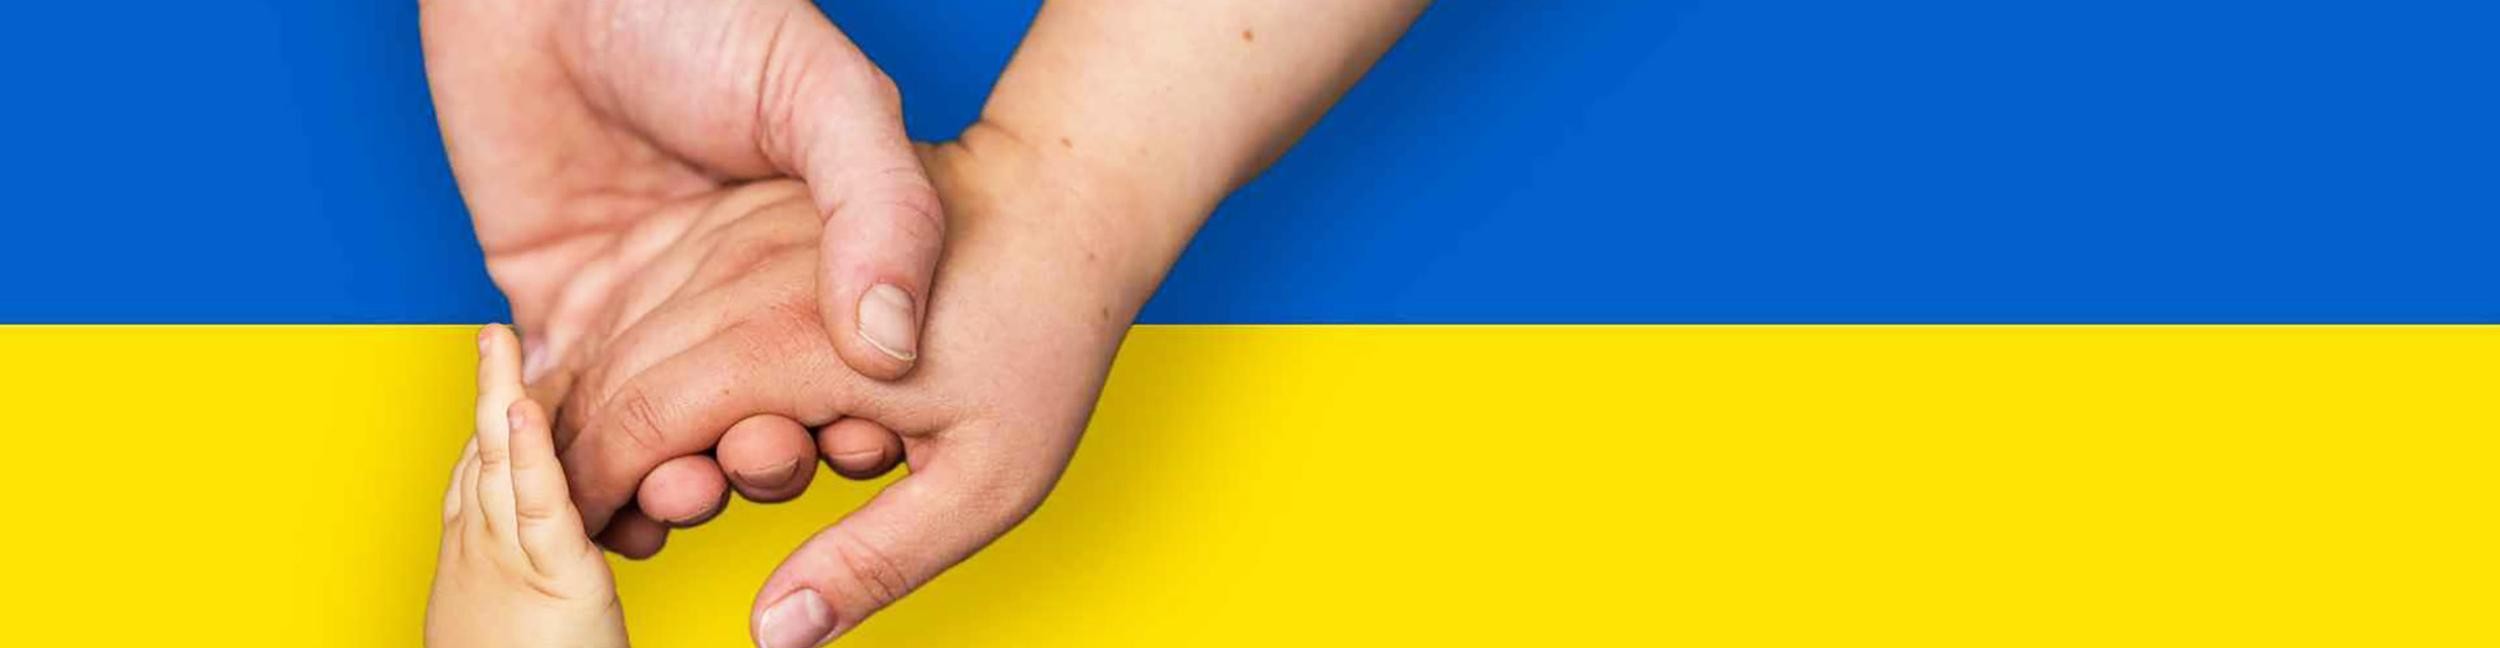 Cohesion with Ukrainian flag in background